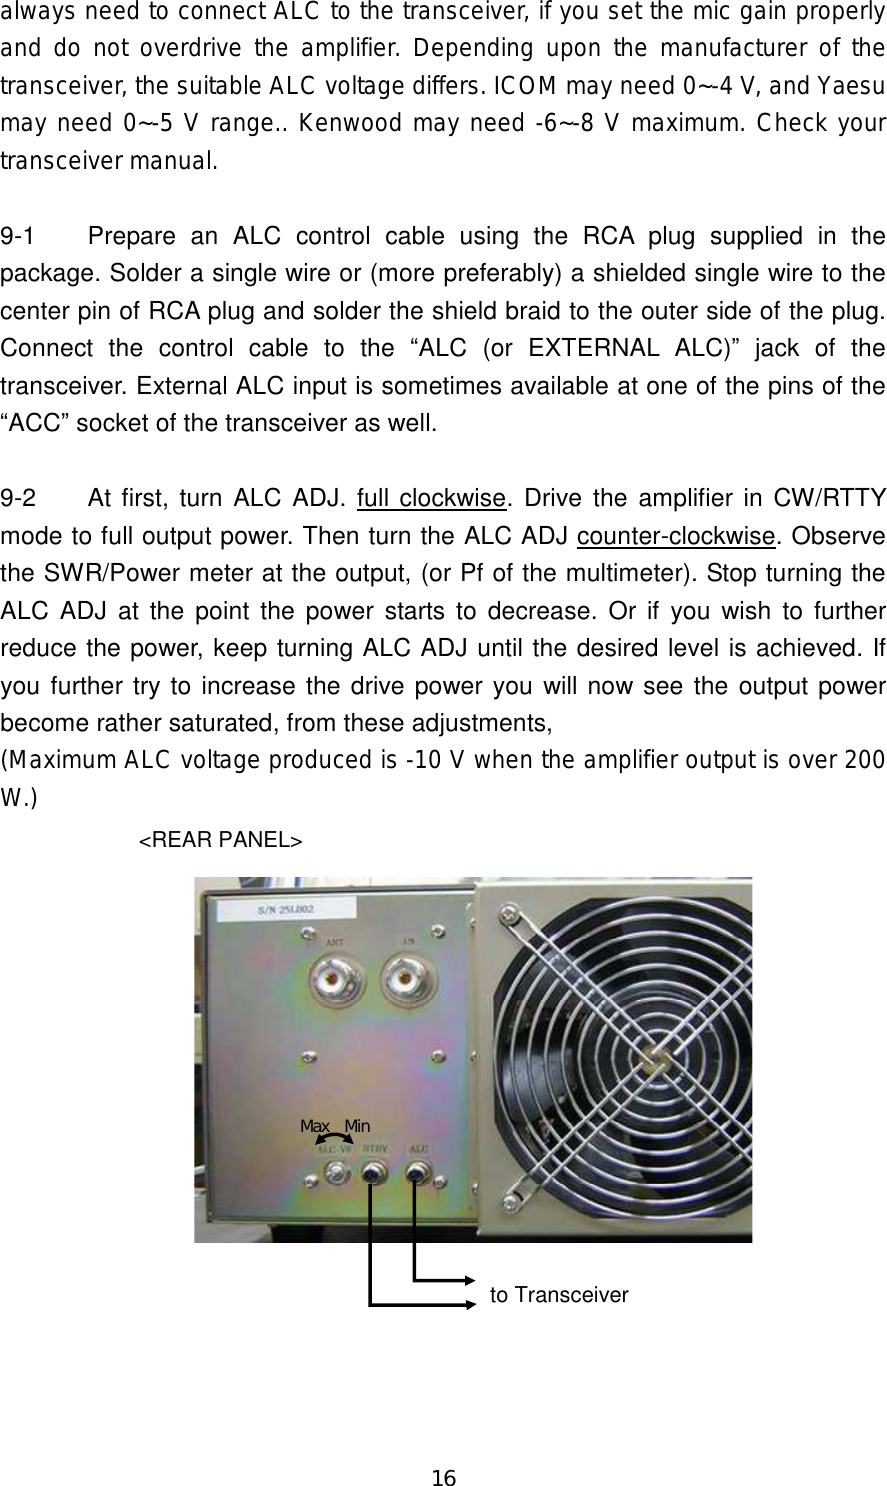 16 always need to connect ALC to the transceiver, if you set the mic gain properly and do not overdrive the amplifier.  Depending upon the manufacturer of the transceiver, the suitable ALC voltage differs. ICOM may need 0~-4 V, and Yaesu may need 0~-5 V range.. Kenwood may need -6~-8 V maximum. Check your transceiver manual.  9-1  Prepare  an  ALC  control  cable  using  the  RCA  plug  supplied  in  the package. Solder a single wire or (more preferably) a shielded single wire to the center pin of RCA plug and solder the shield braid to the outer side of the plug. Connect  the  control  cable  to  the  “ALC  (or  EXTERNAL  ALC)”  jack  of  the transceiver. External ALC input is sometimes available at one of the pins of the “ACC” socket of the transceiver as well.  9-2  At first, turn ALC ADJ. full clockwise. Drive  the amplifier in CW/RTTY mode to full output power. Then turn the ALC ADJ counter-clockwise. Observe the SWR/Power meter at the output, (or Pf of the multimeter). Stop turning the ALC ADJ at the point  the power starts to decrease. Or if  you  wish  to further reduce the power, keep turning ALC ADJ until the desired level is achieved. If you further try to increase the drive power you will now see the output power become rather saturated, from these adjustments,   (Maximum ALC voltage produced is -10 V when the amplifier output is over 200 W.) &lt;REAR PANEL&gt;Max   Minto Transceiver 